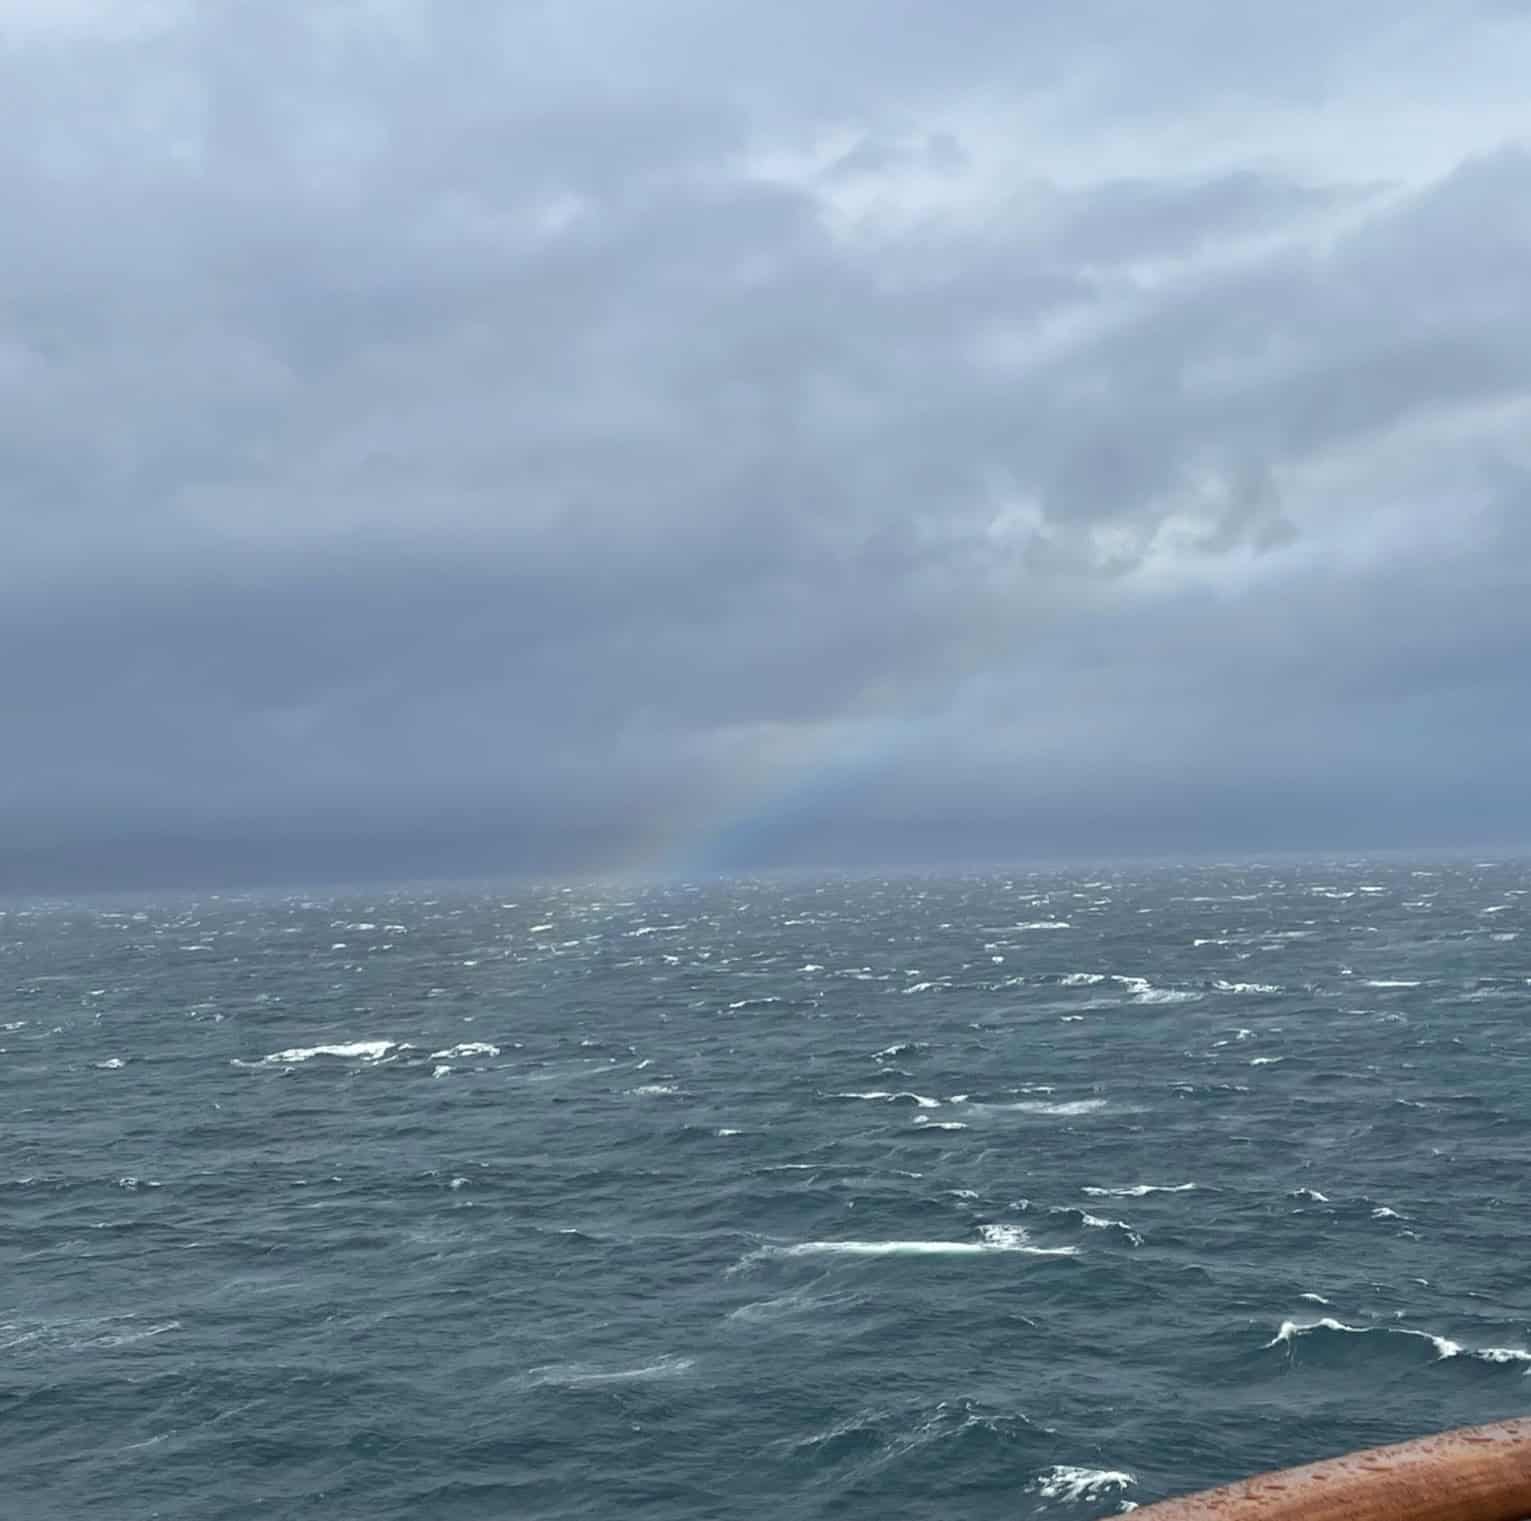 Waves on the ocean with a faint rainbow in the middle of the air